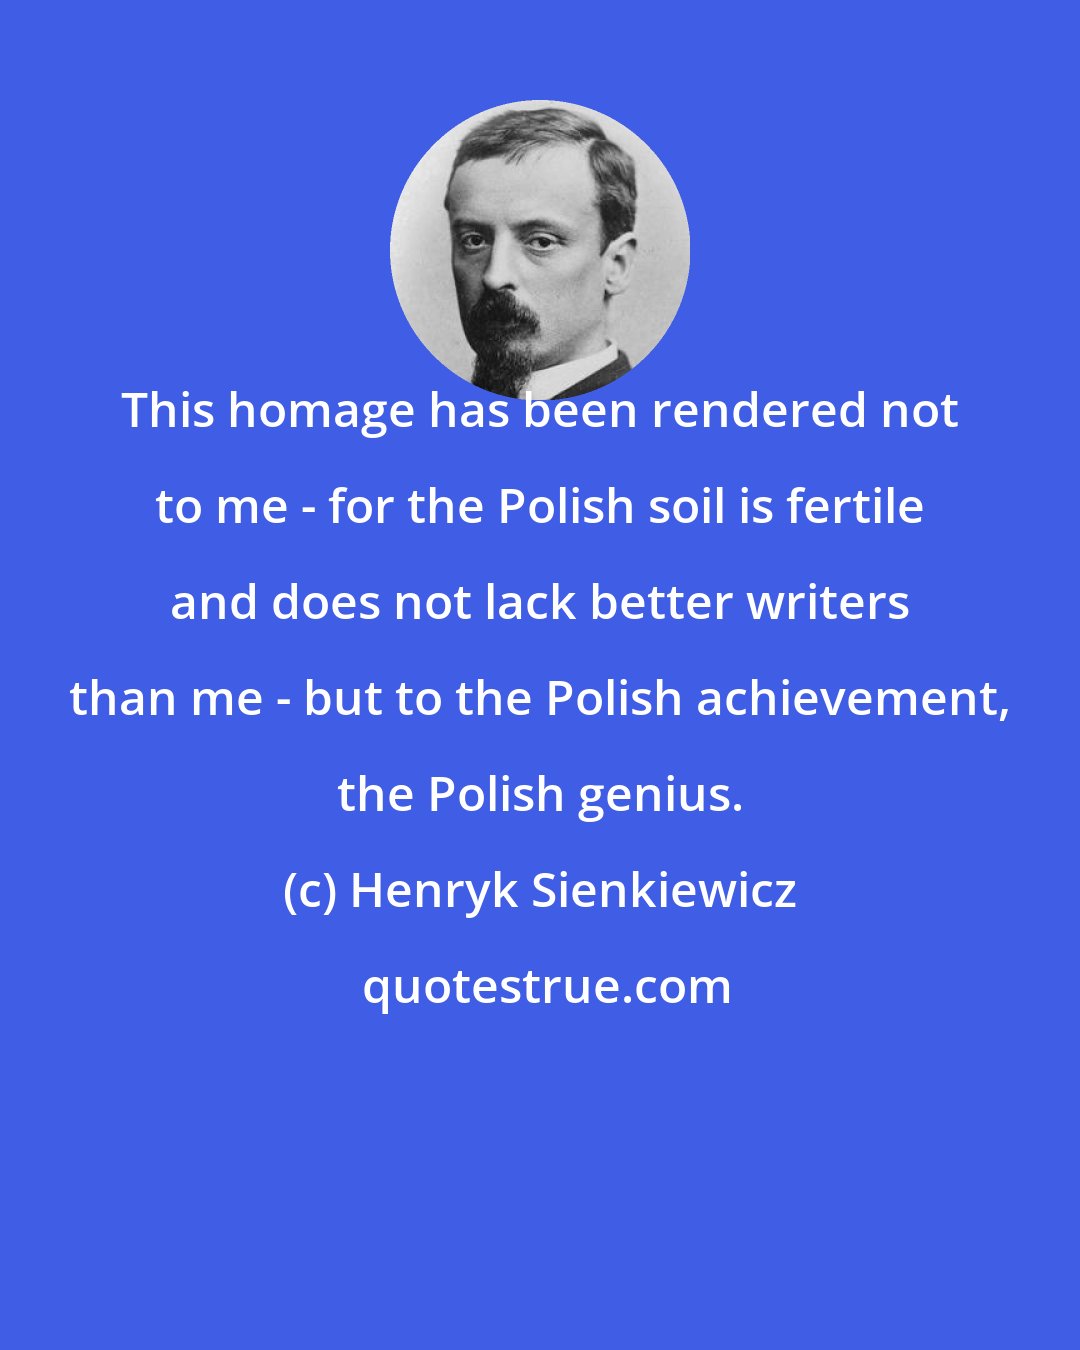 Henryk Sienkiewicz: This homage has been rendered not to me - for the Polish soil is fertile and does not lack better writers than me - but to the Polish achievement, the Polish genius.